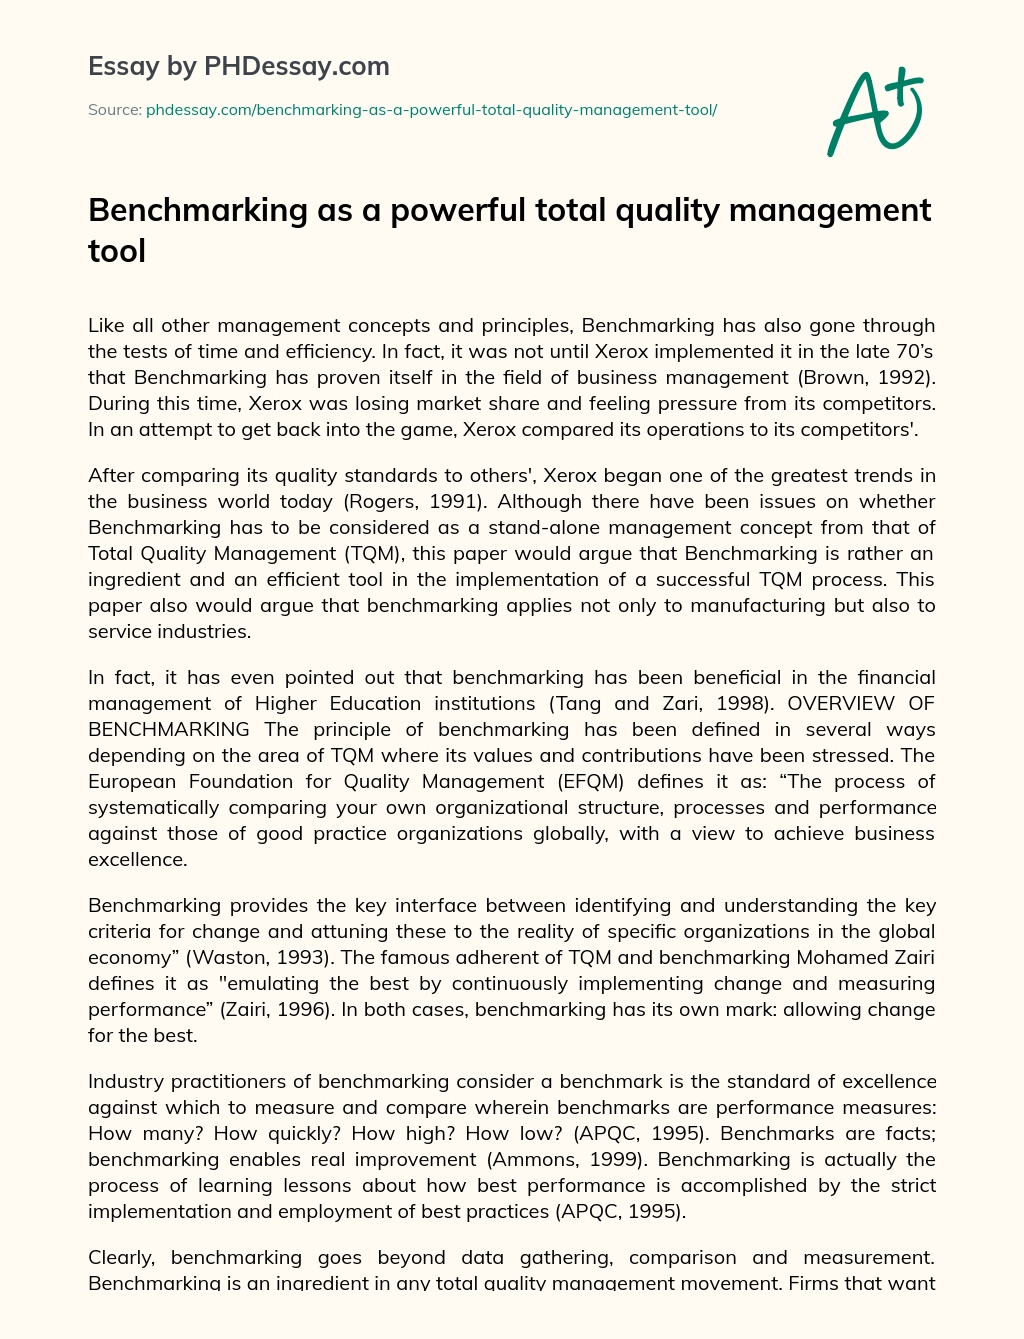 Benchmarking as a powerful total quality management tool essay